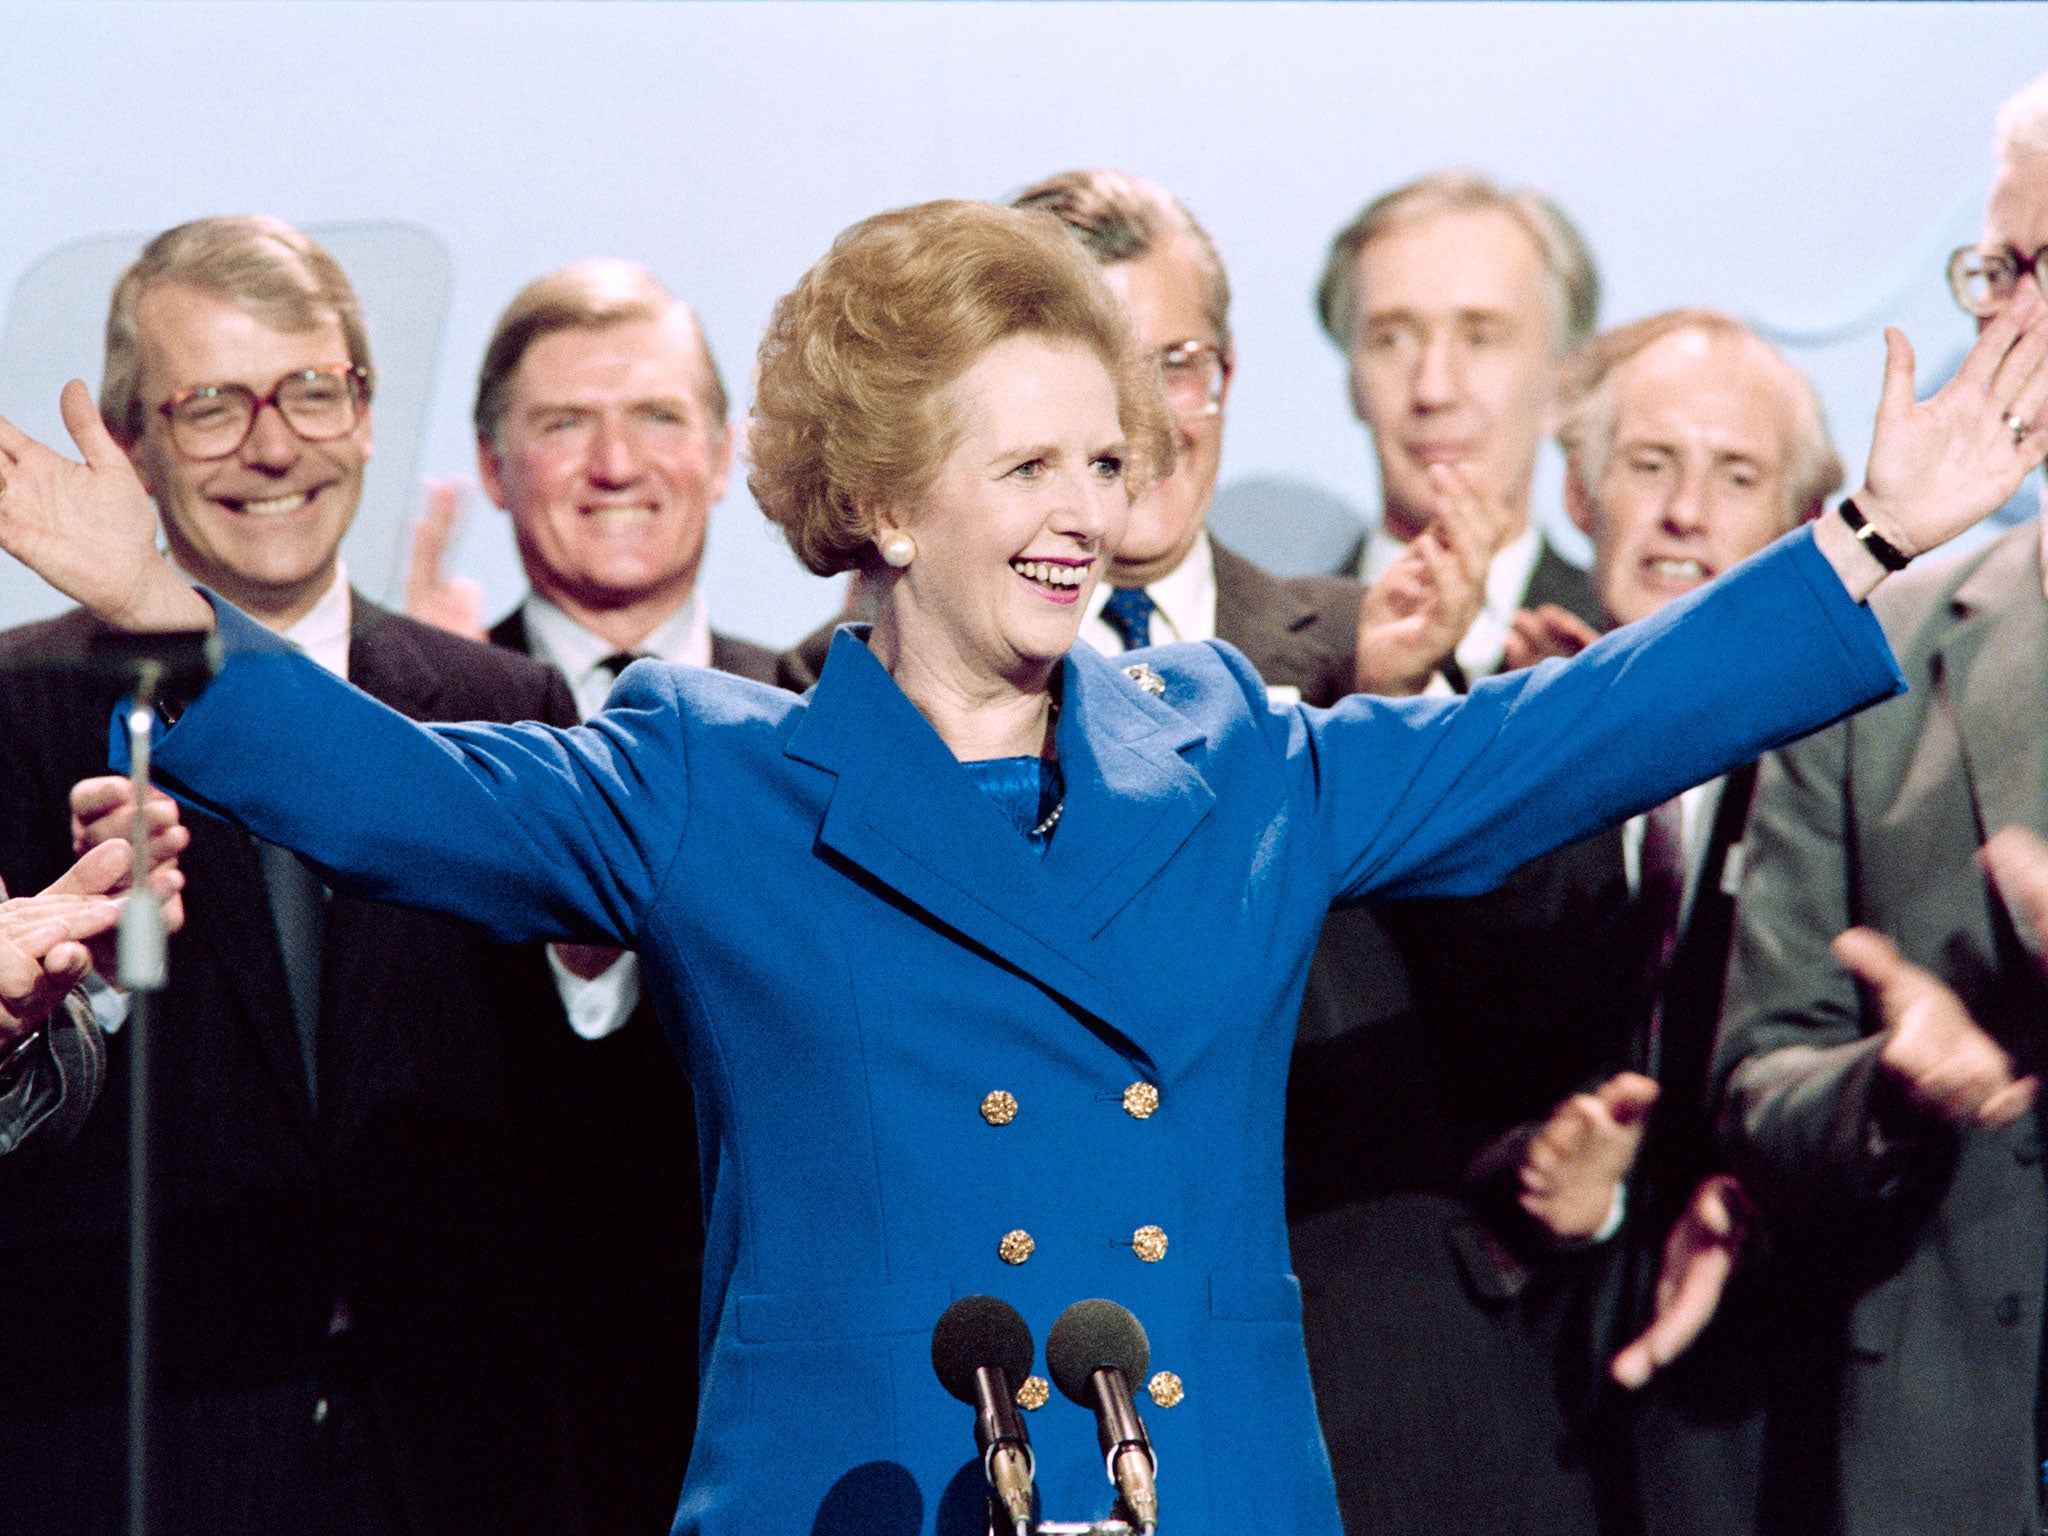 You remember not Thatcher’s mid-Eighties power suits but the woman above them